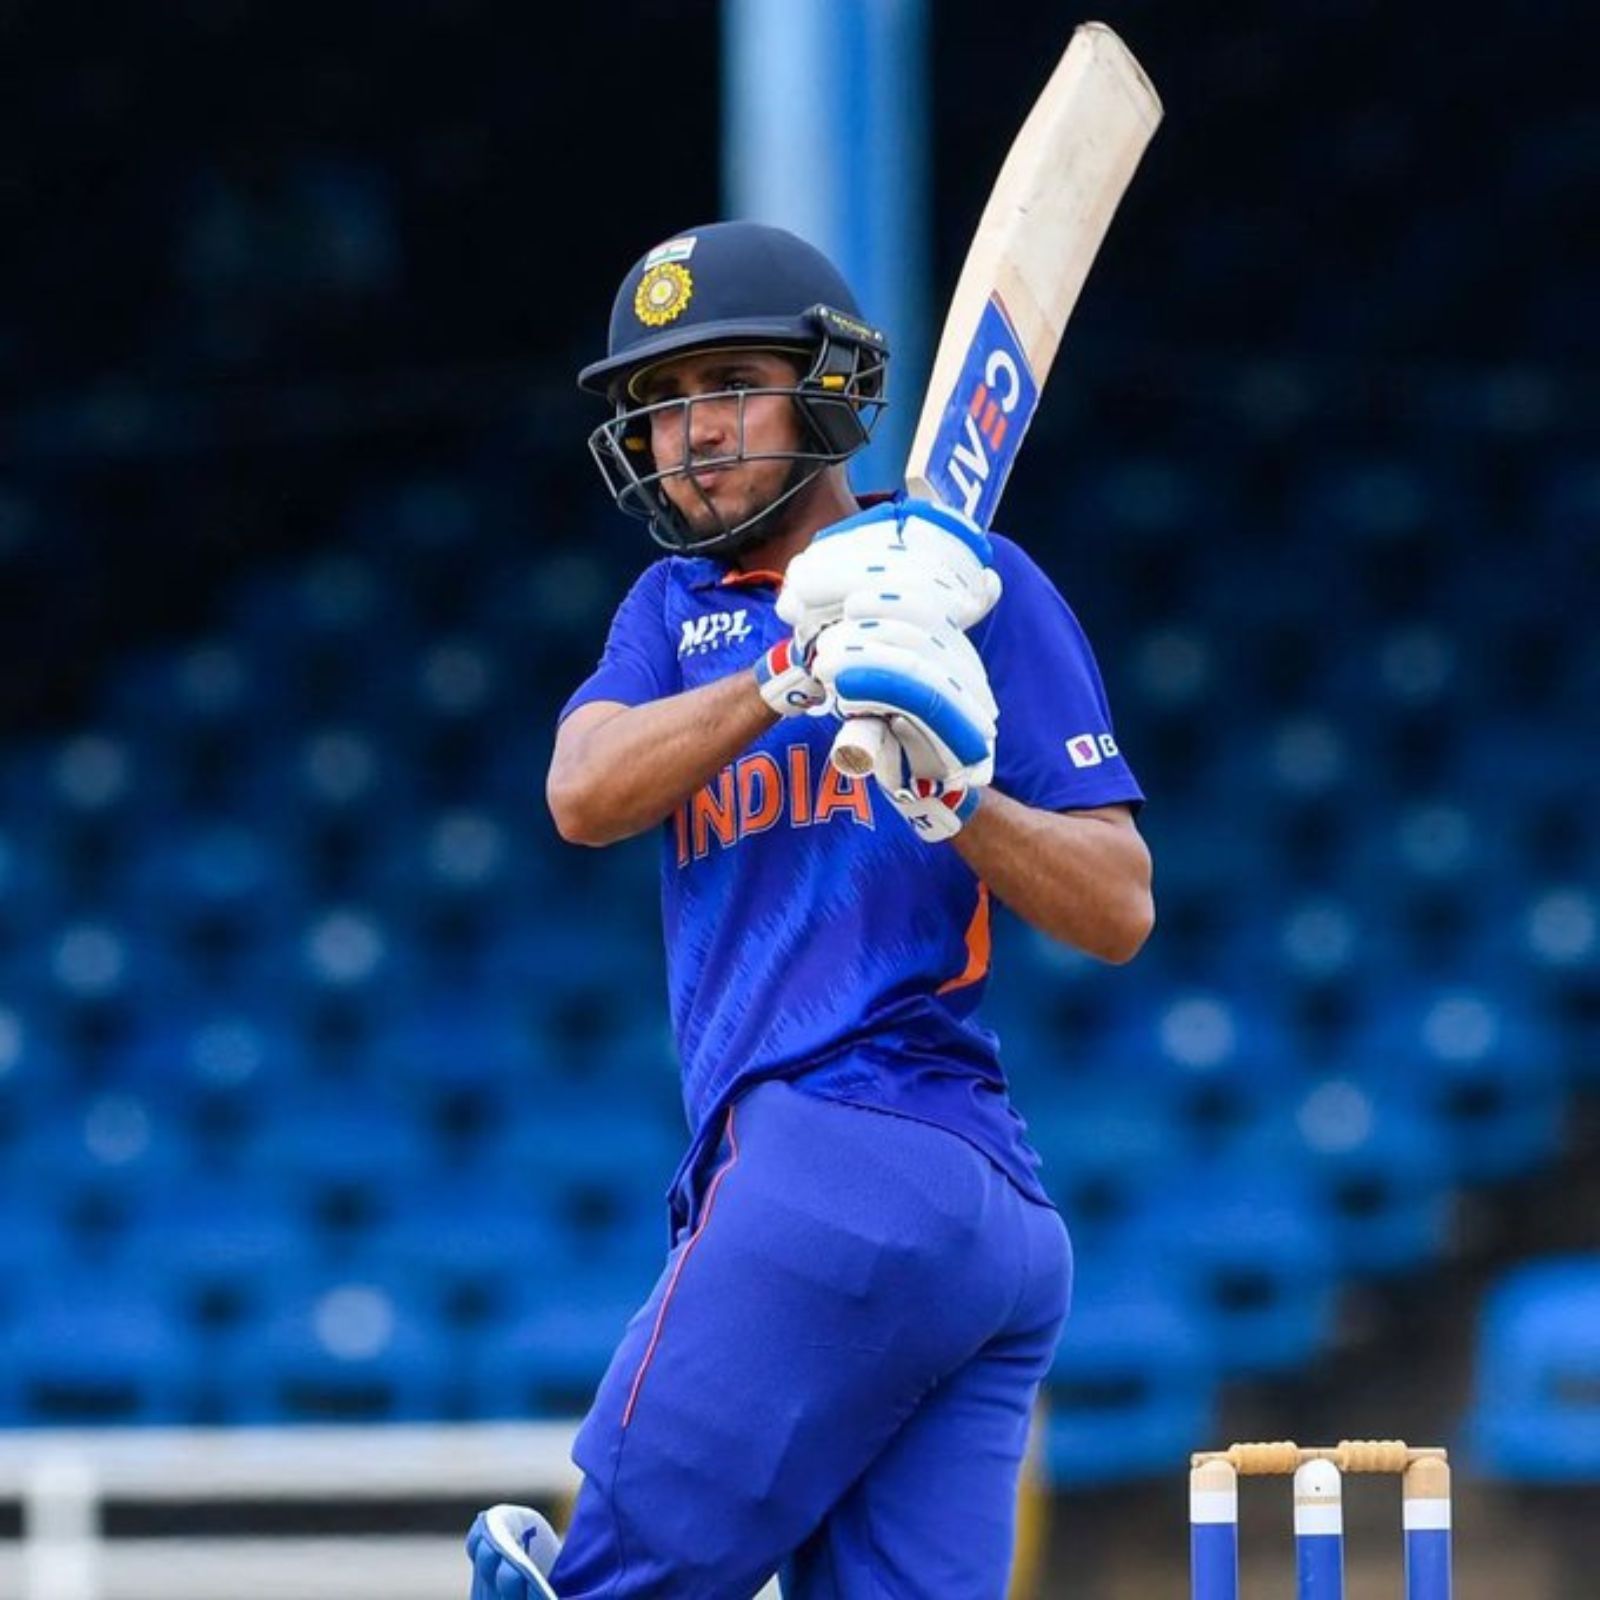 IND vs WI, 3rd ODI India Complete 3-0 Whitewash After Rain Denies Shubman Gill a Maiden Hundred